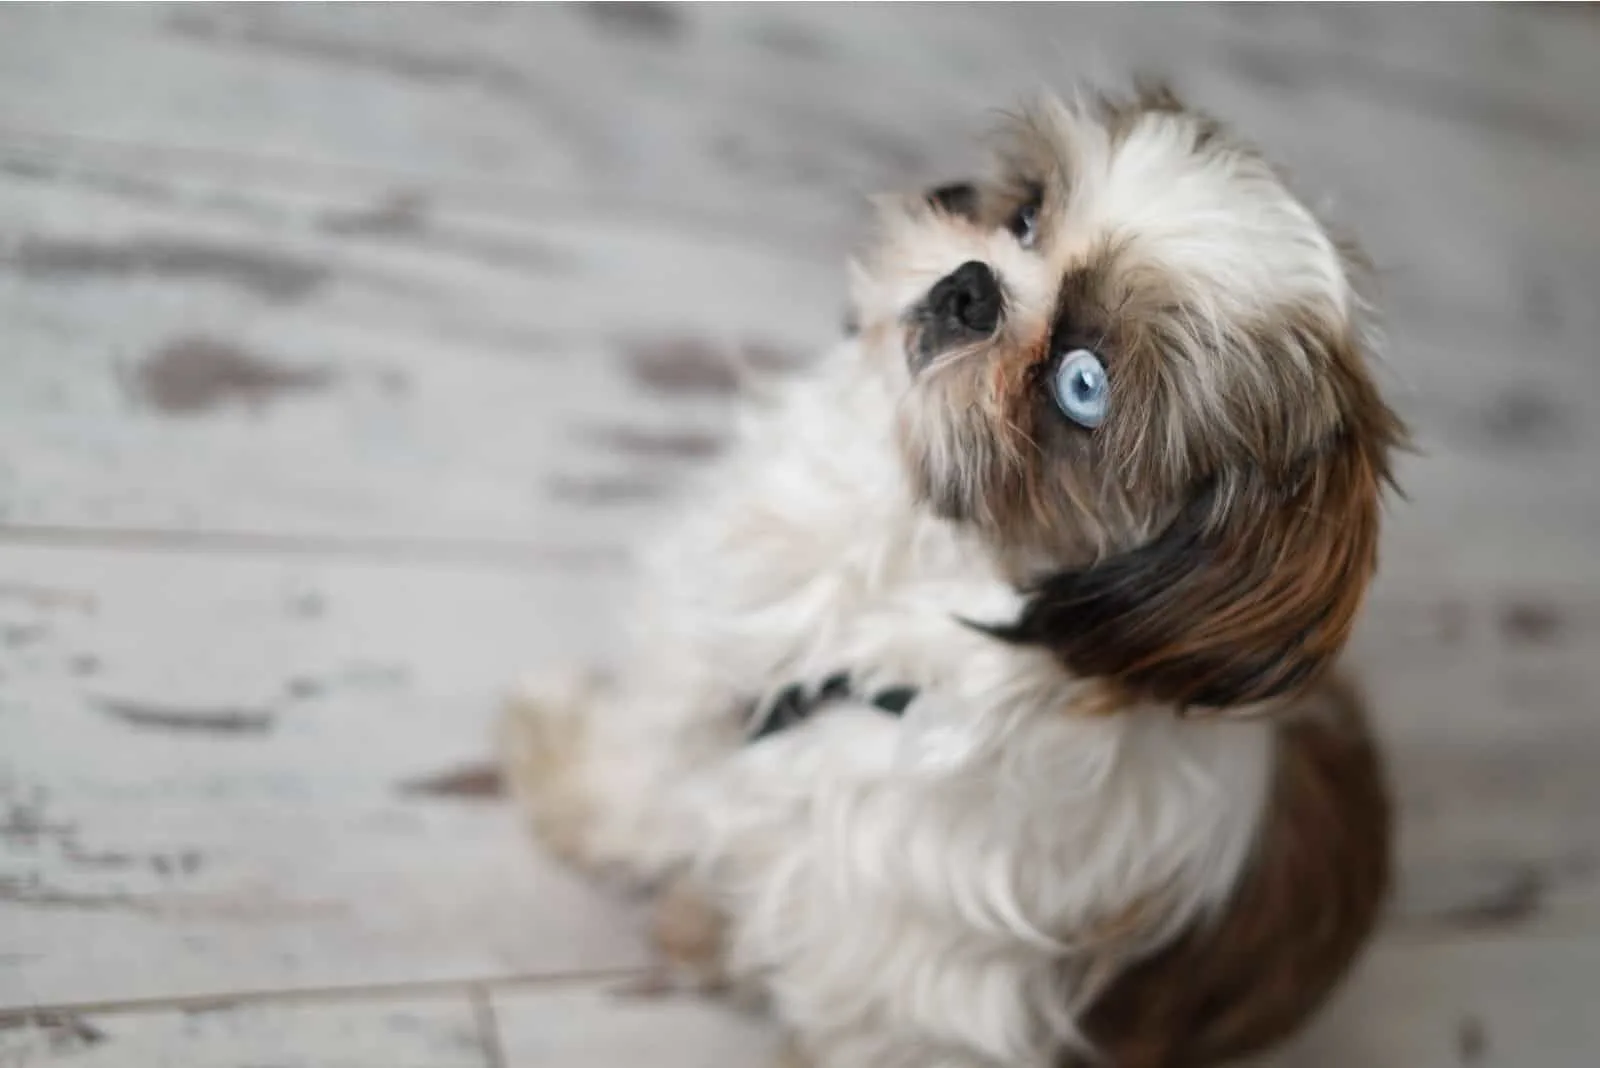 shih tzu puppy with blue eye looking up